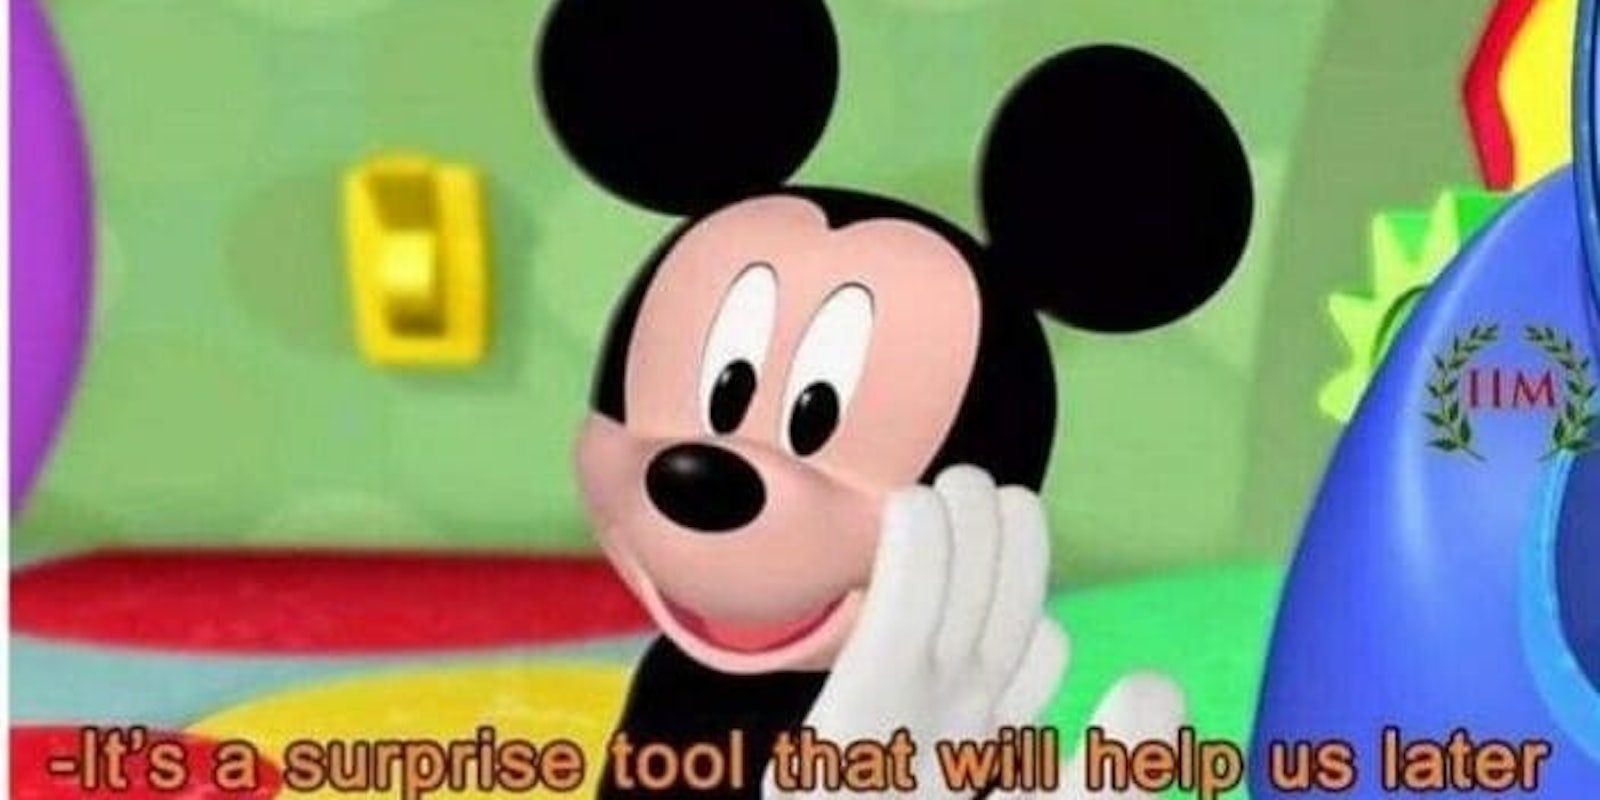 Mickey has a surprise tool (it's the second amendment)